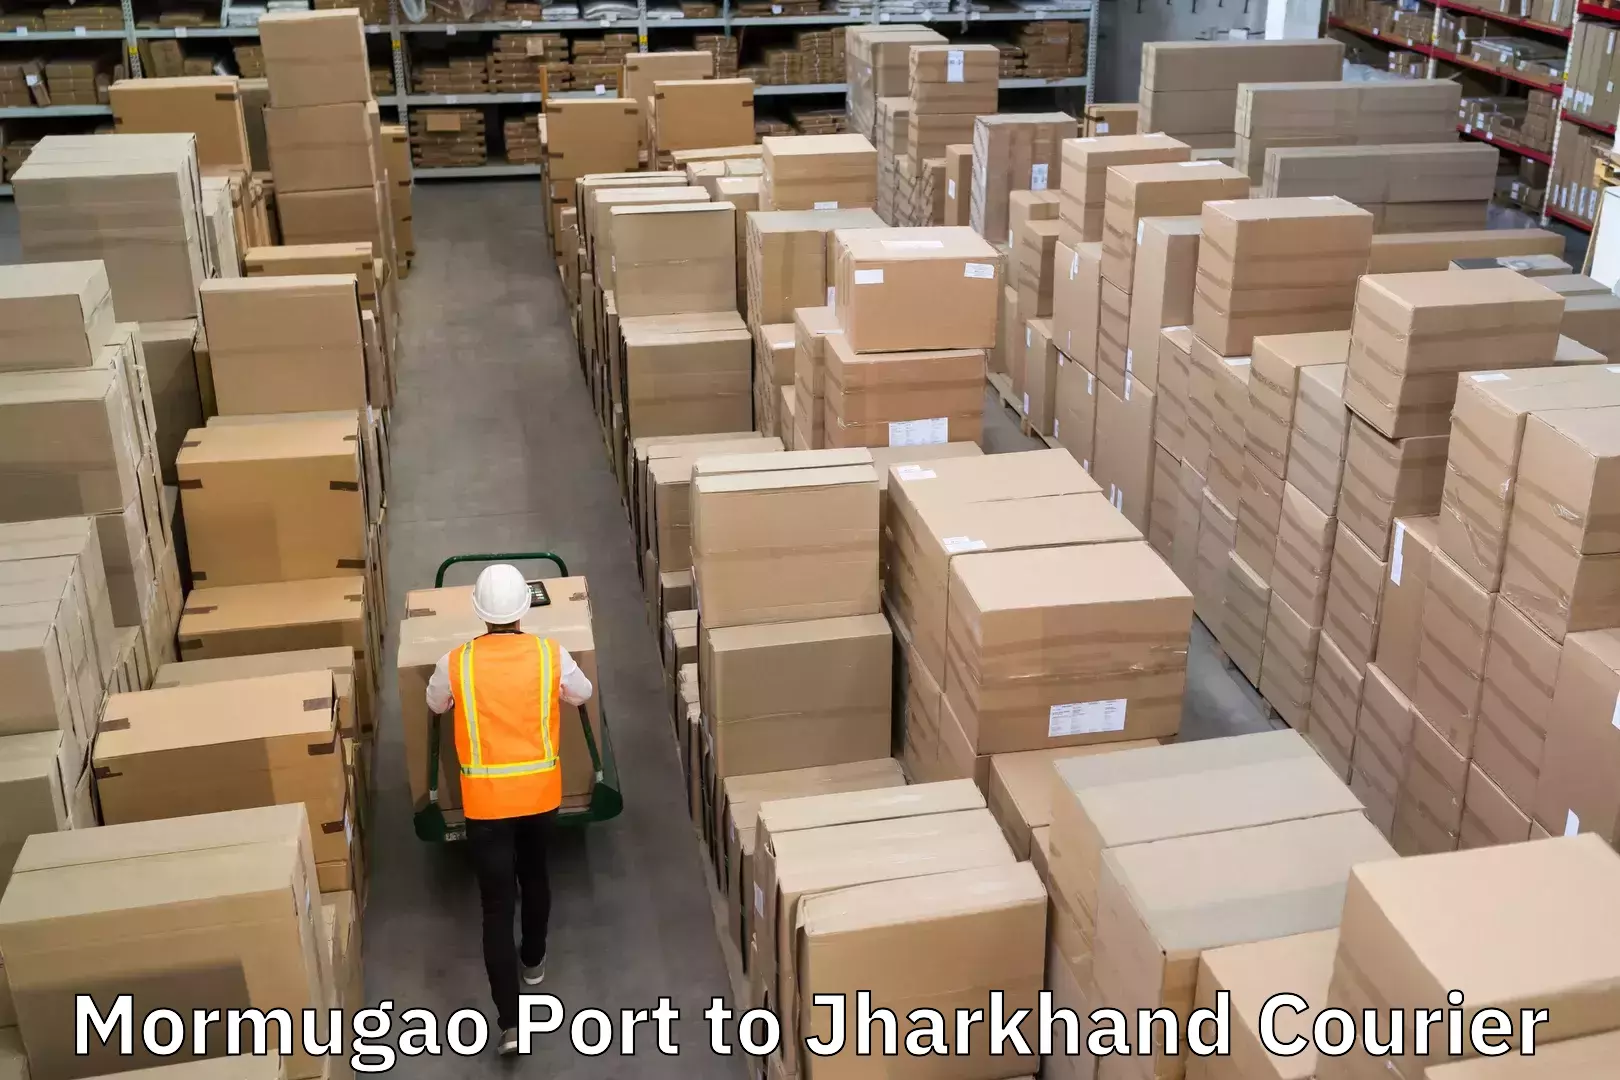 Express postal services in Mormugao Port to Jharkhand